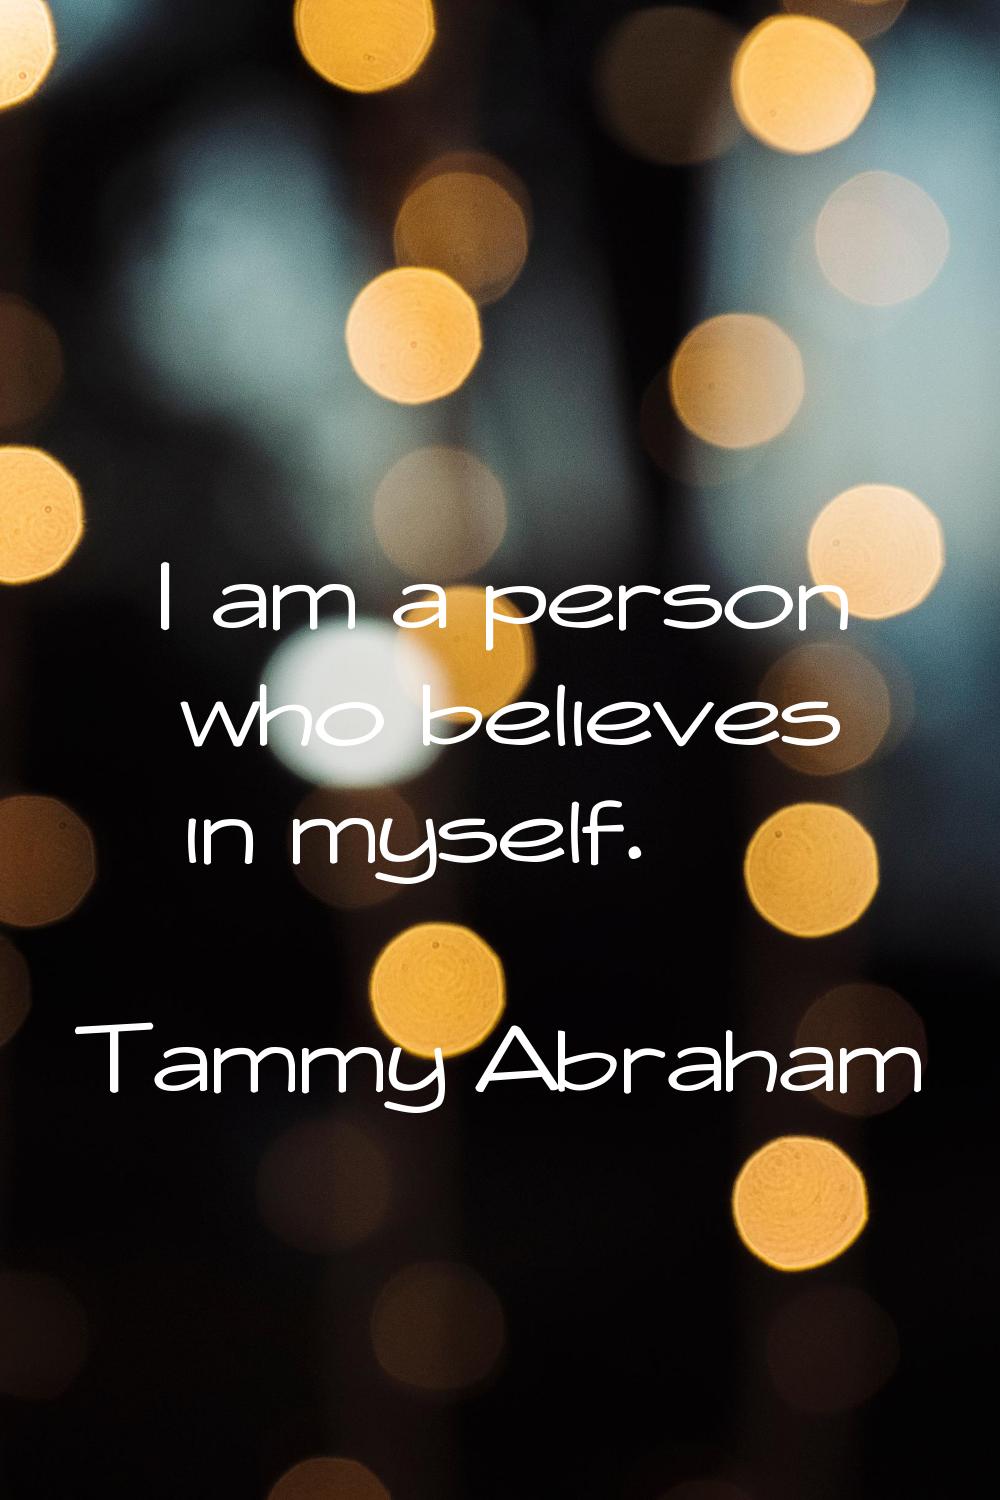 I am a person who believes in myself.